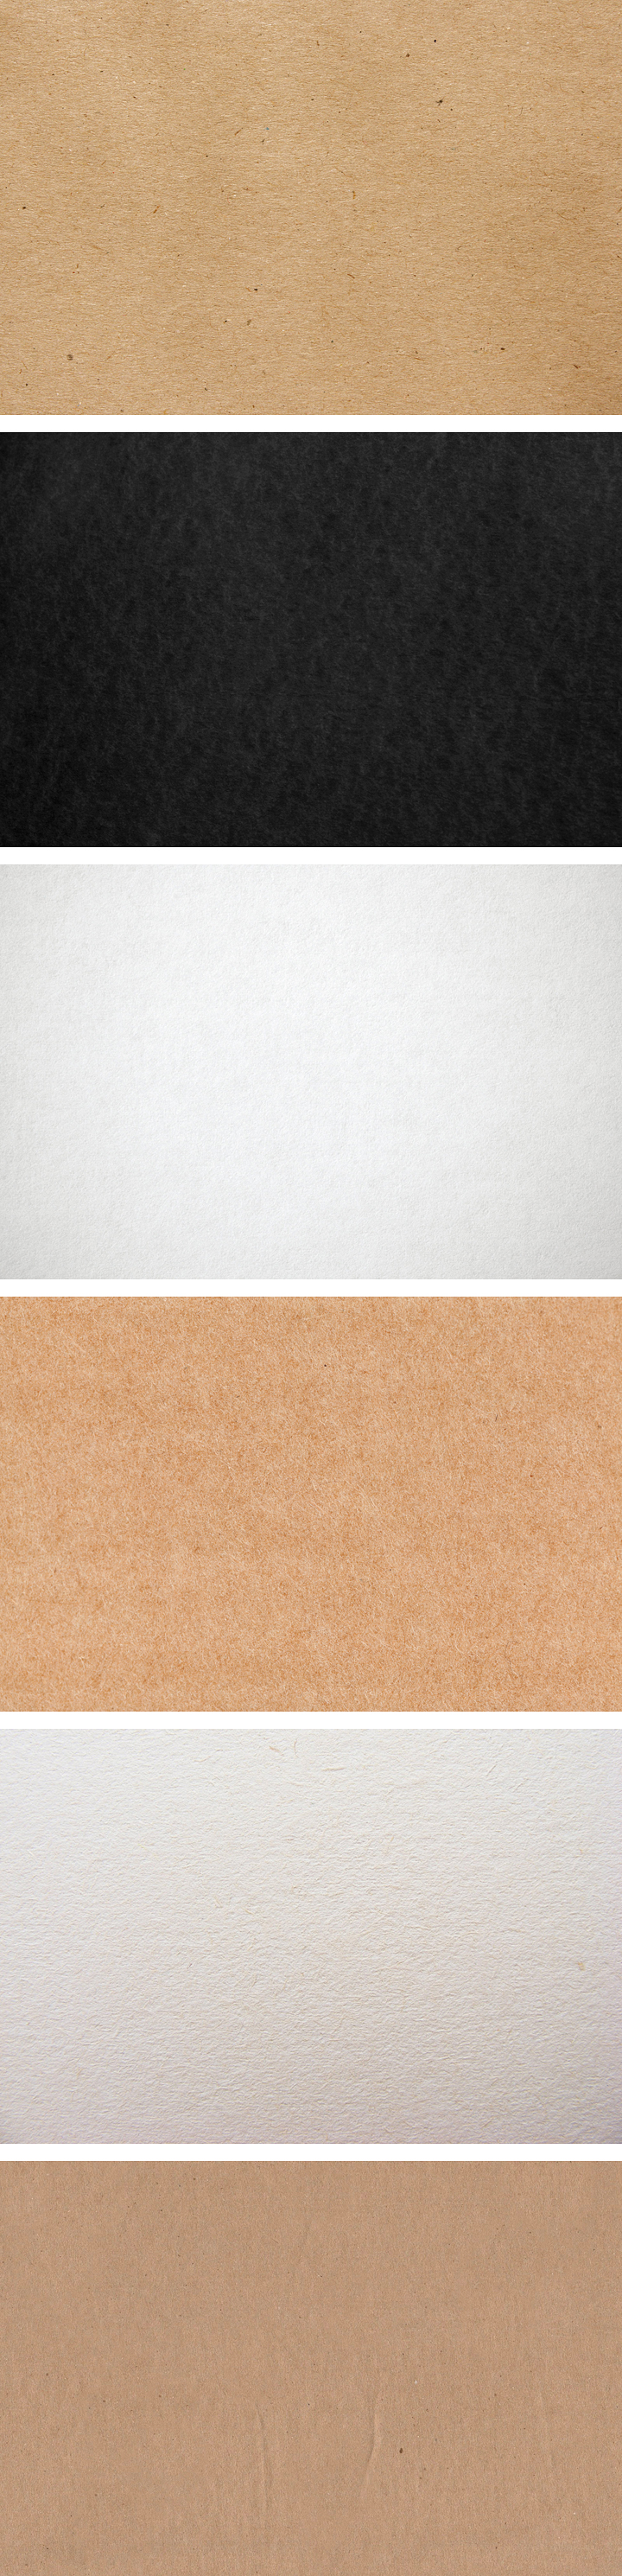 Free-Paper-Textures-720